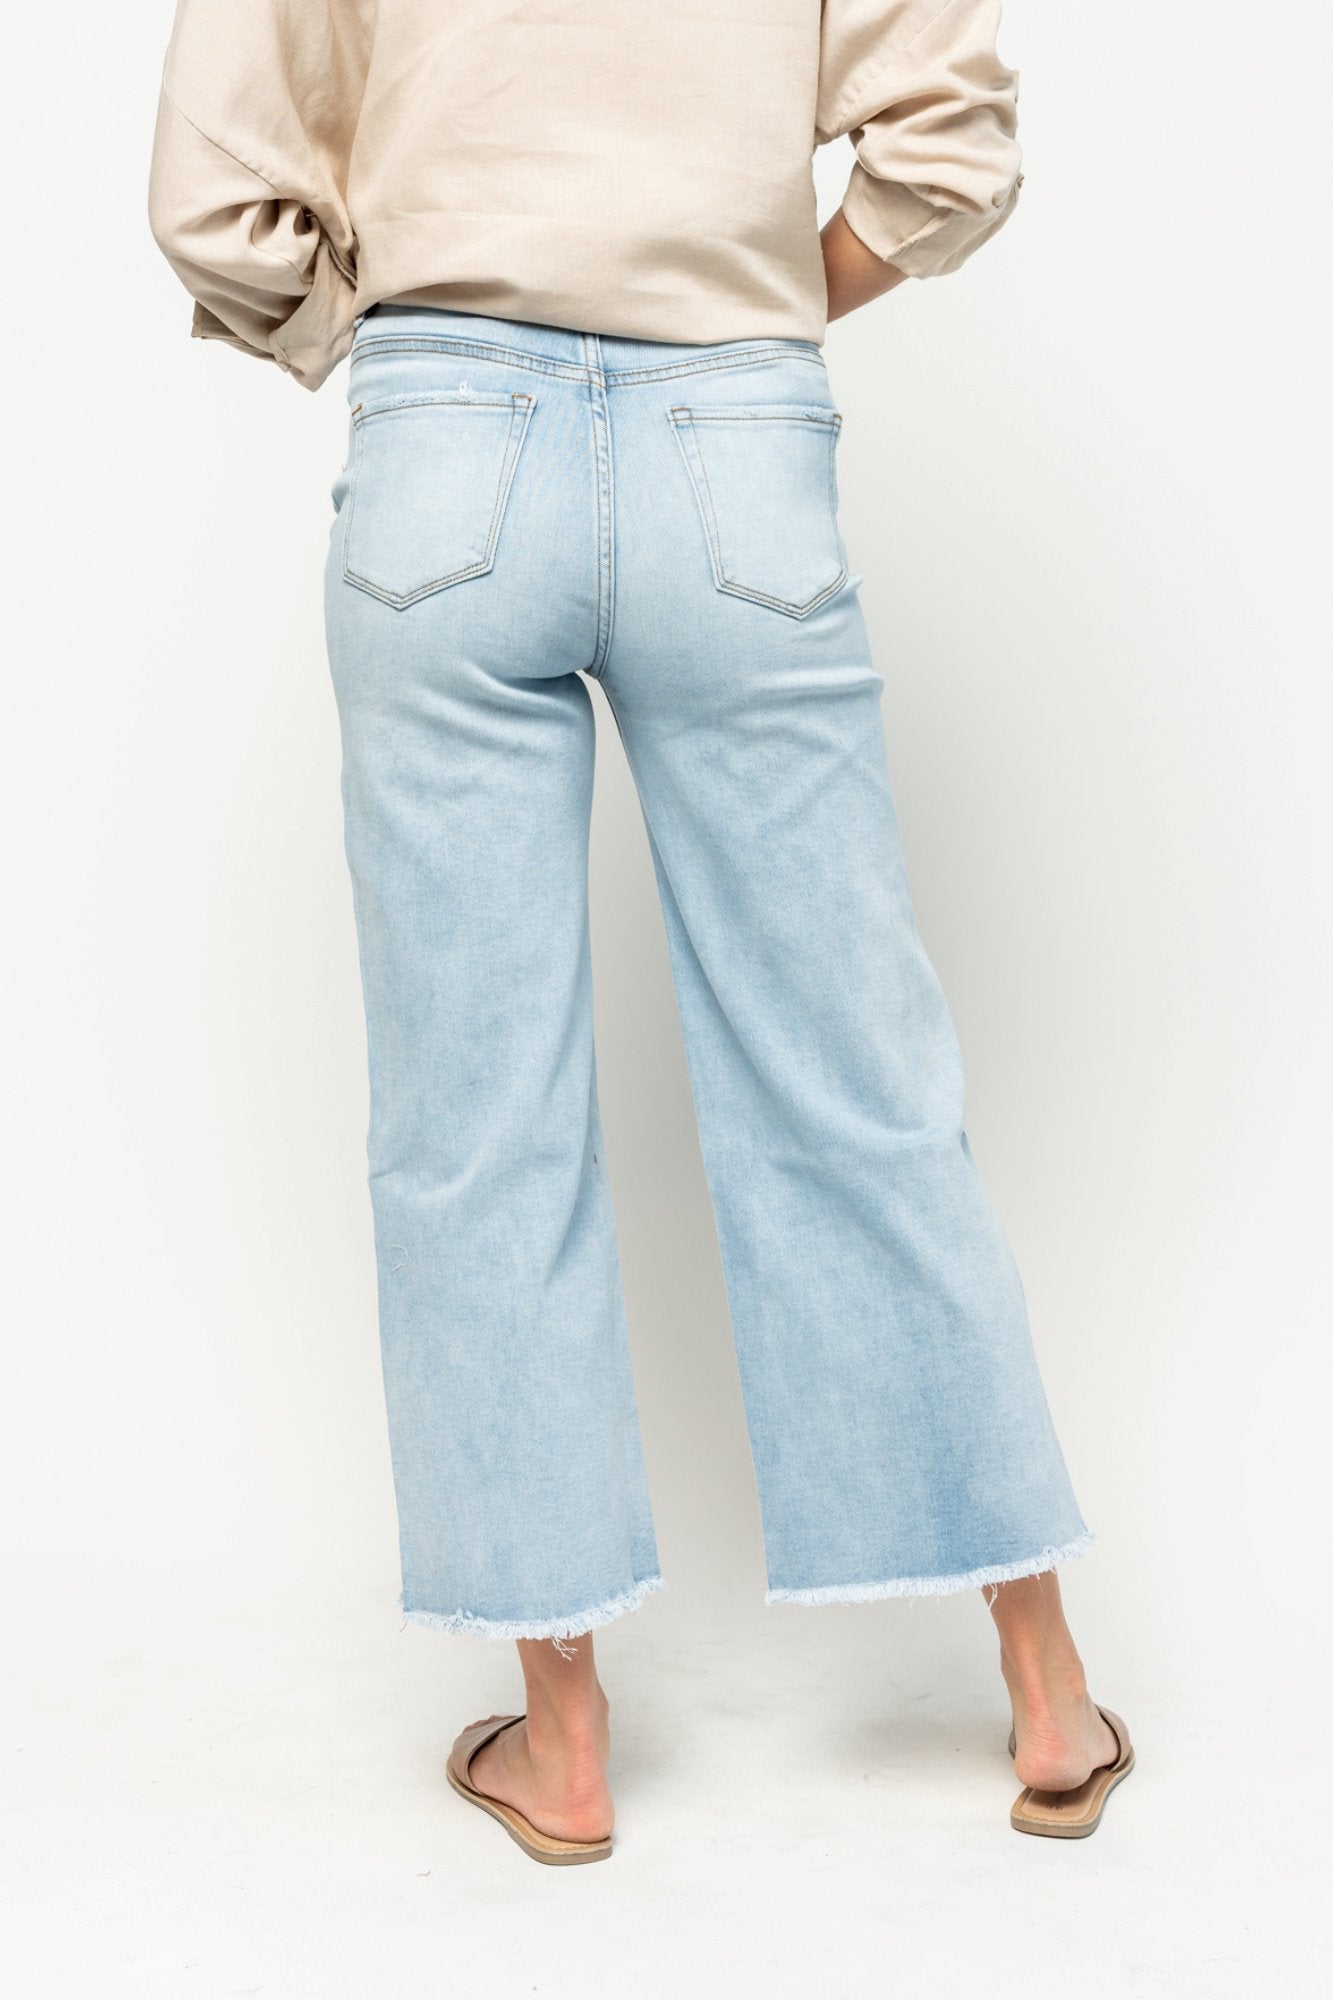 Hampton Jeans - Wide Leg, High Rise Apparel & Accessories Holley Girl 